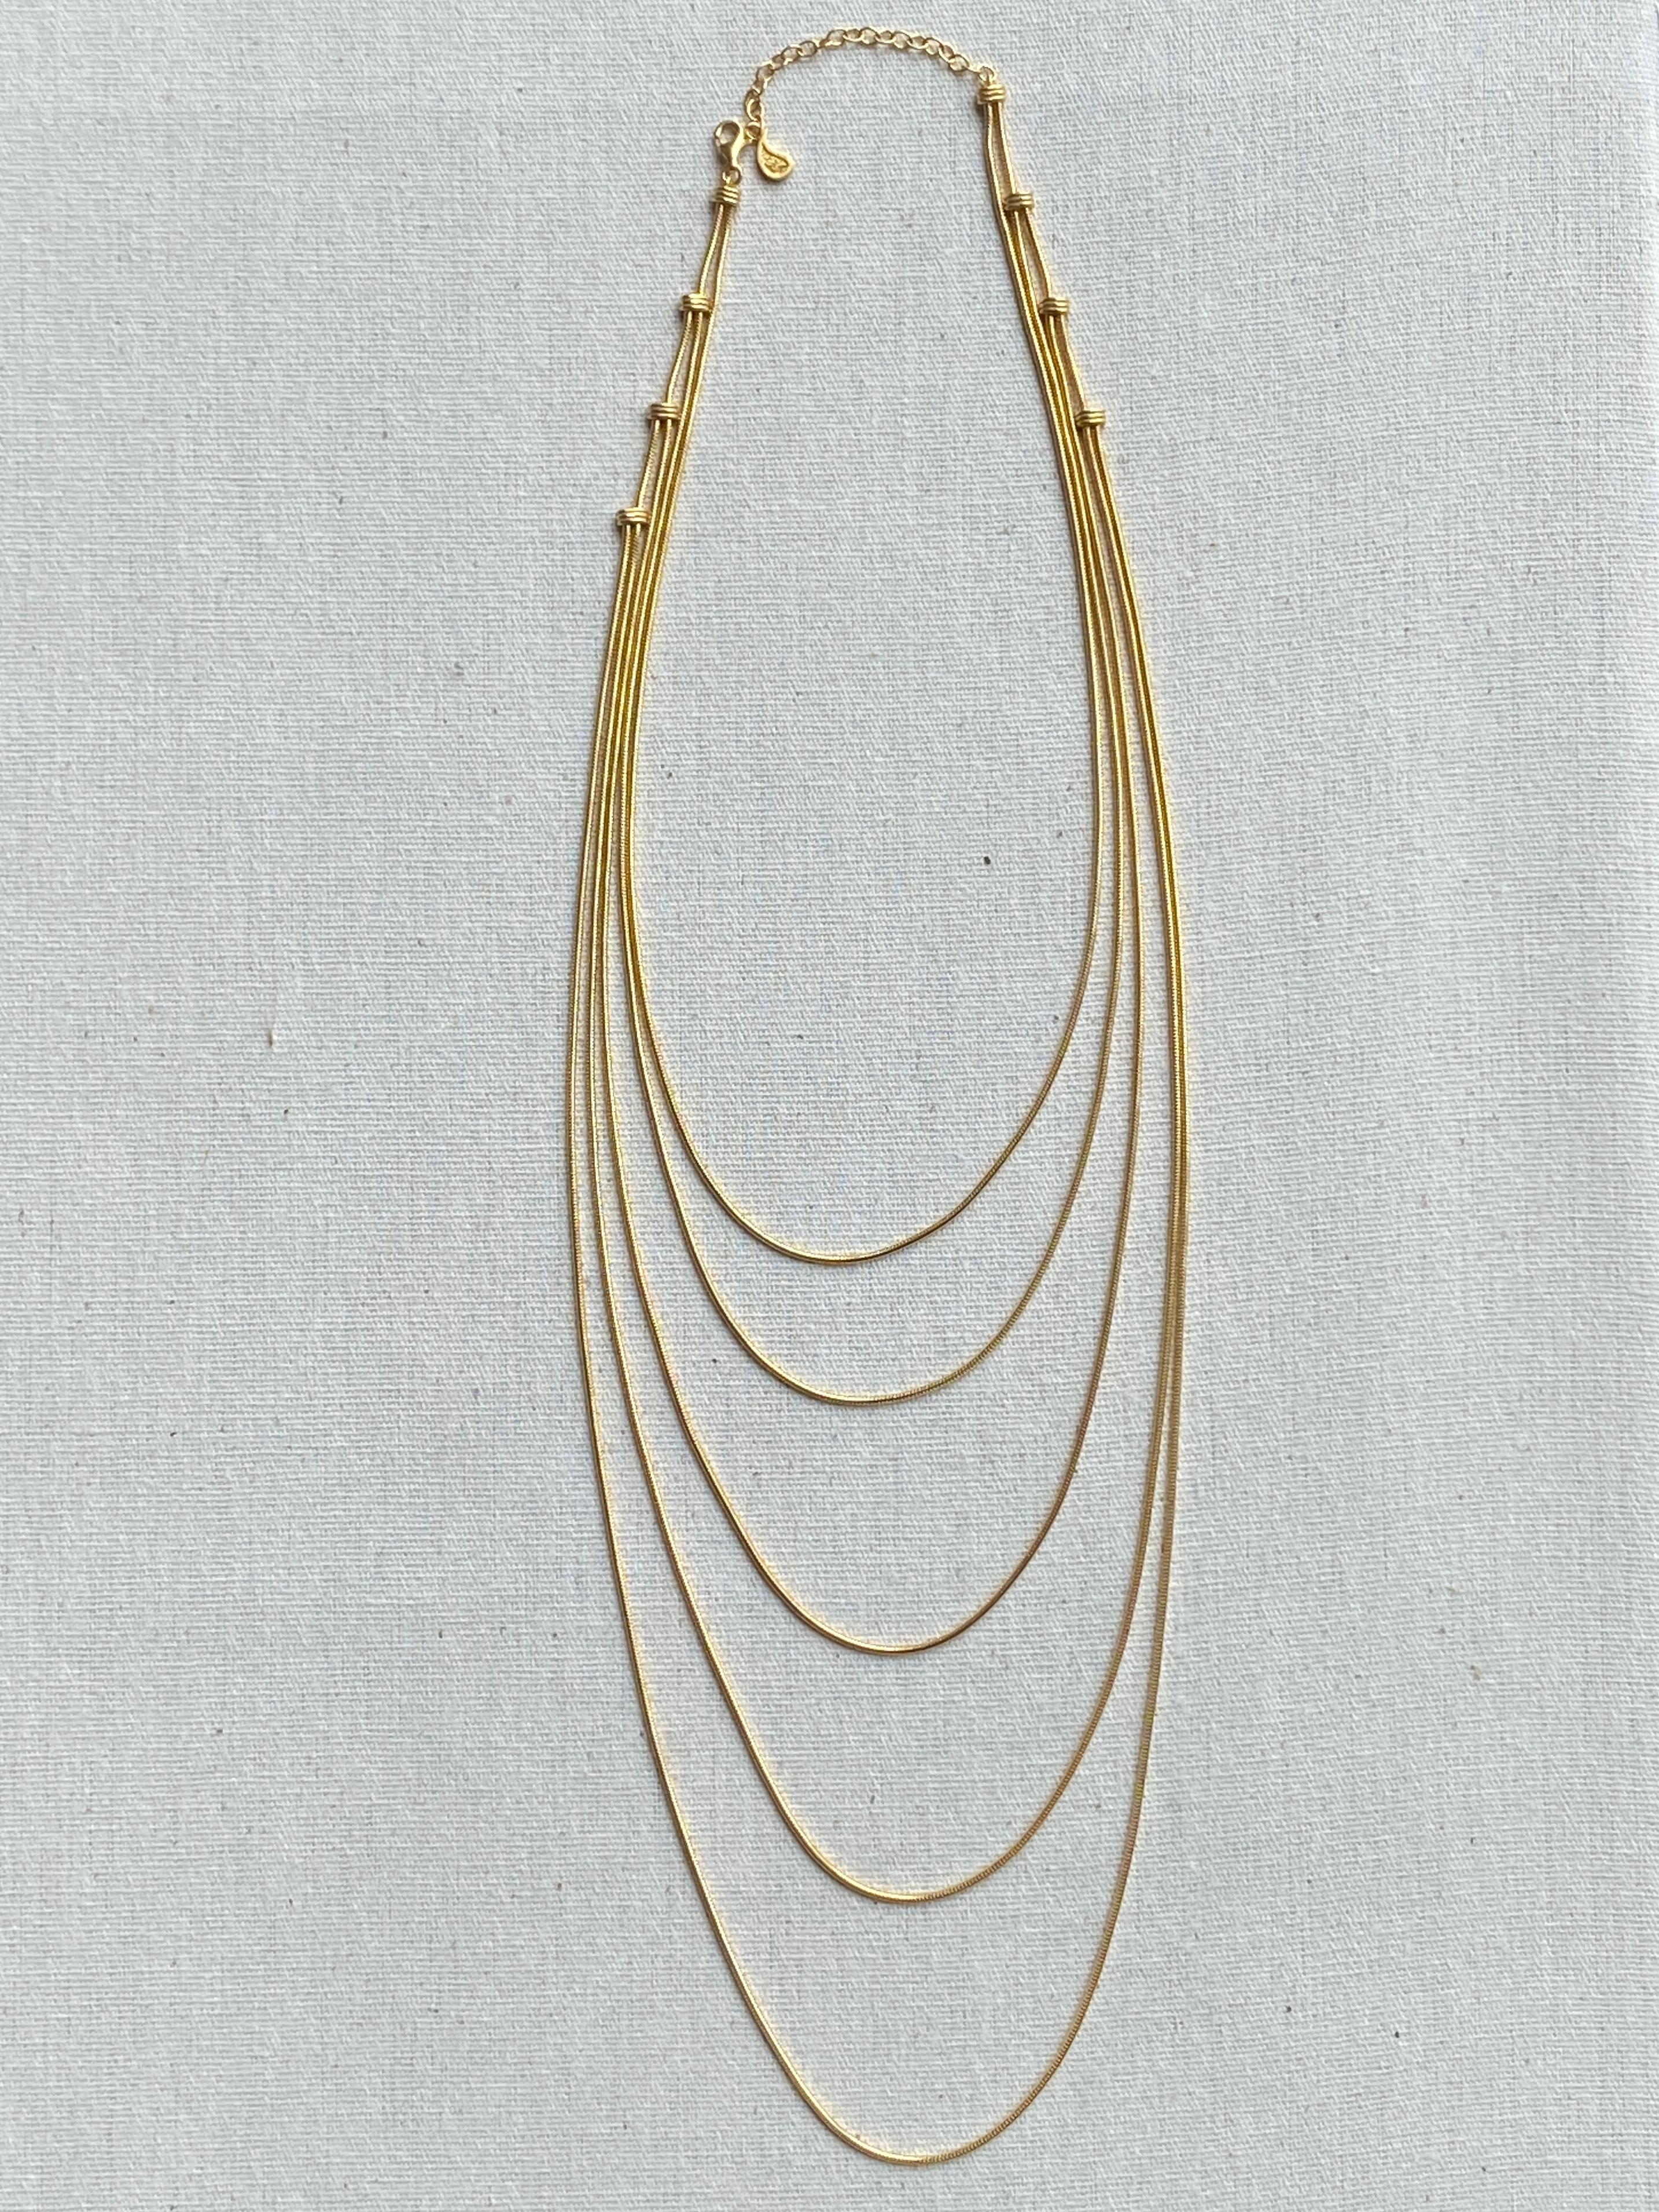 Necklace Snake Chain Minimal Long Movement 18K Gold-Plated Silver Greek Jewelry For Sale 3